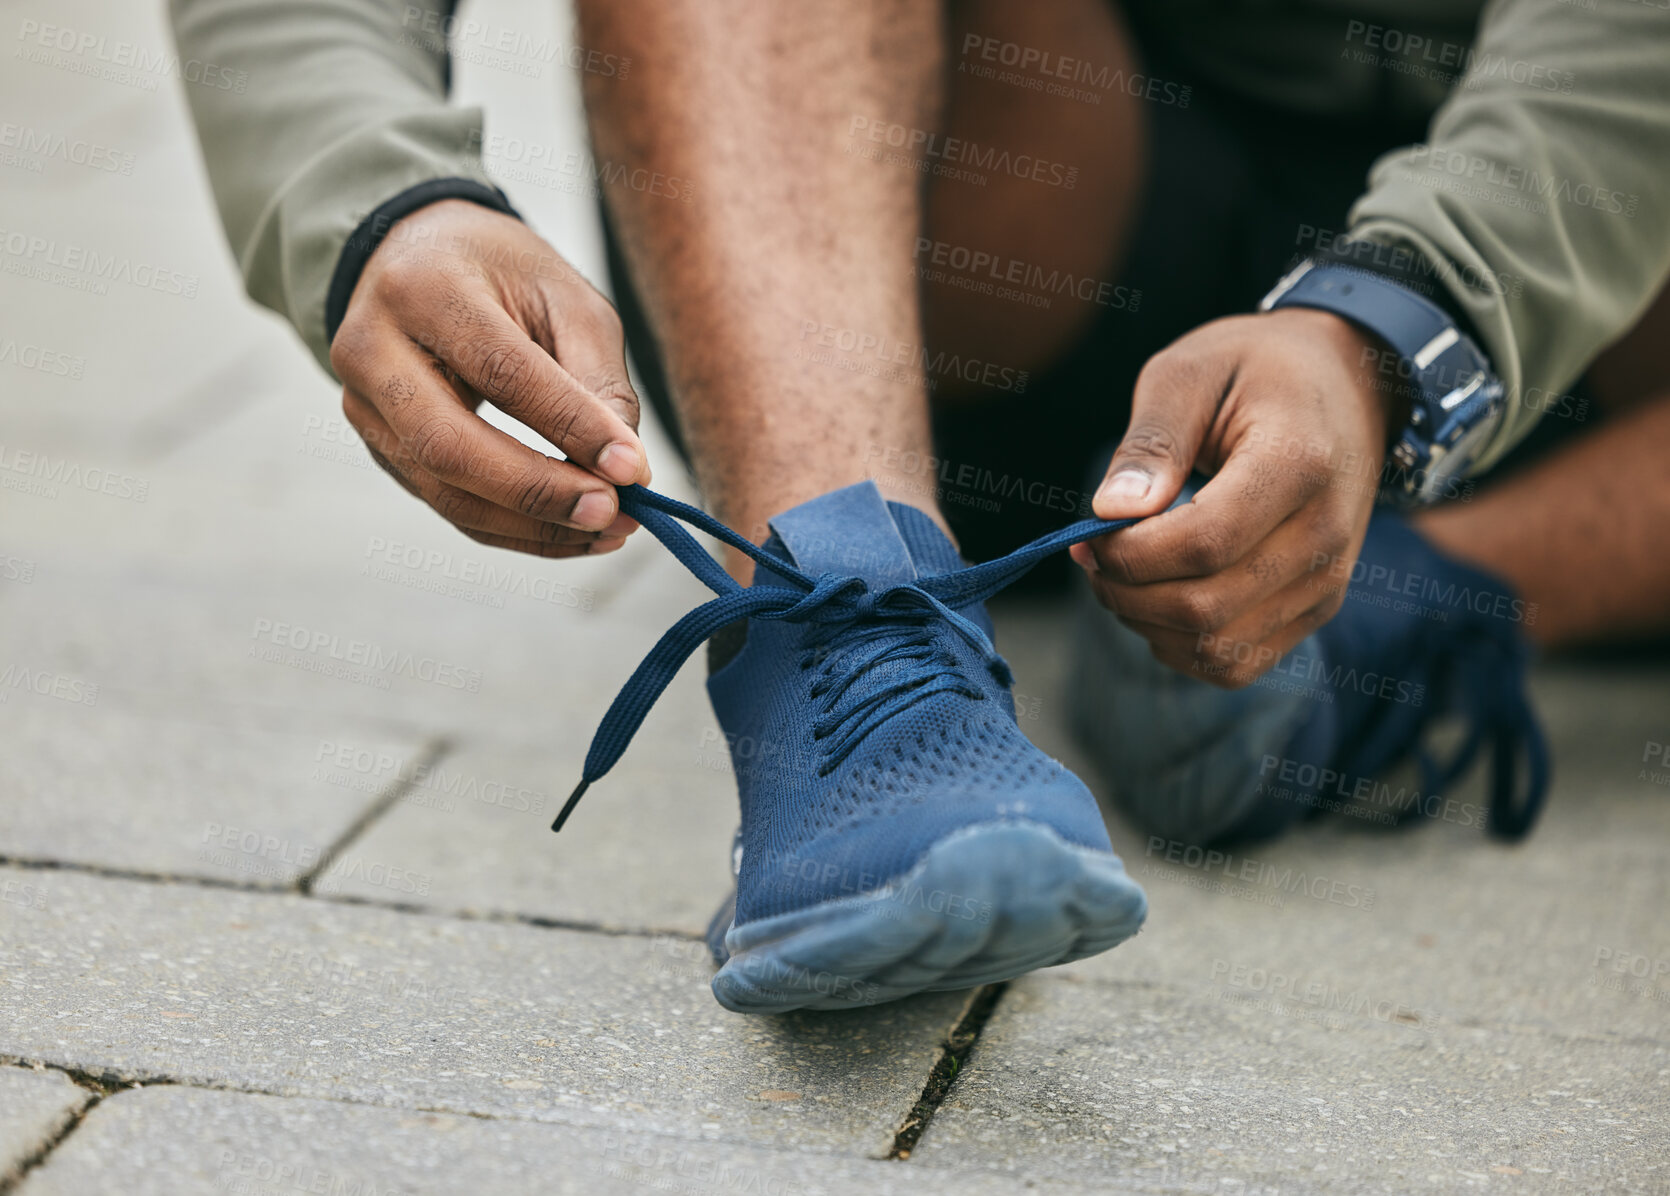 Buy stock photo Fitness, hands and black man tie shoes in city and getting ready for running, workout or exercise. Wellness, sports and male runner tying sneaker lace and preparing for training on street outdoors.
